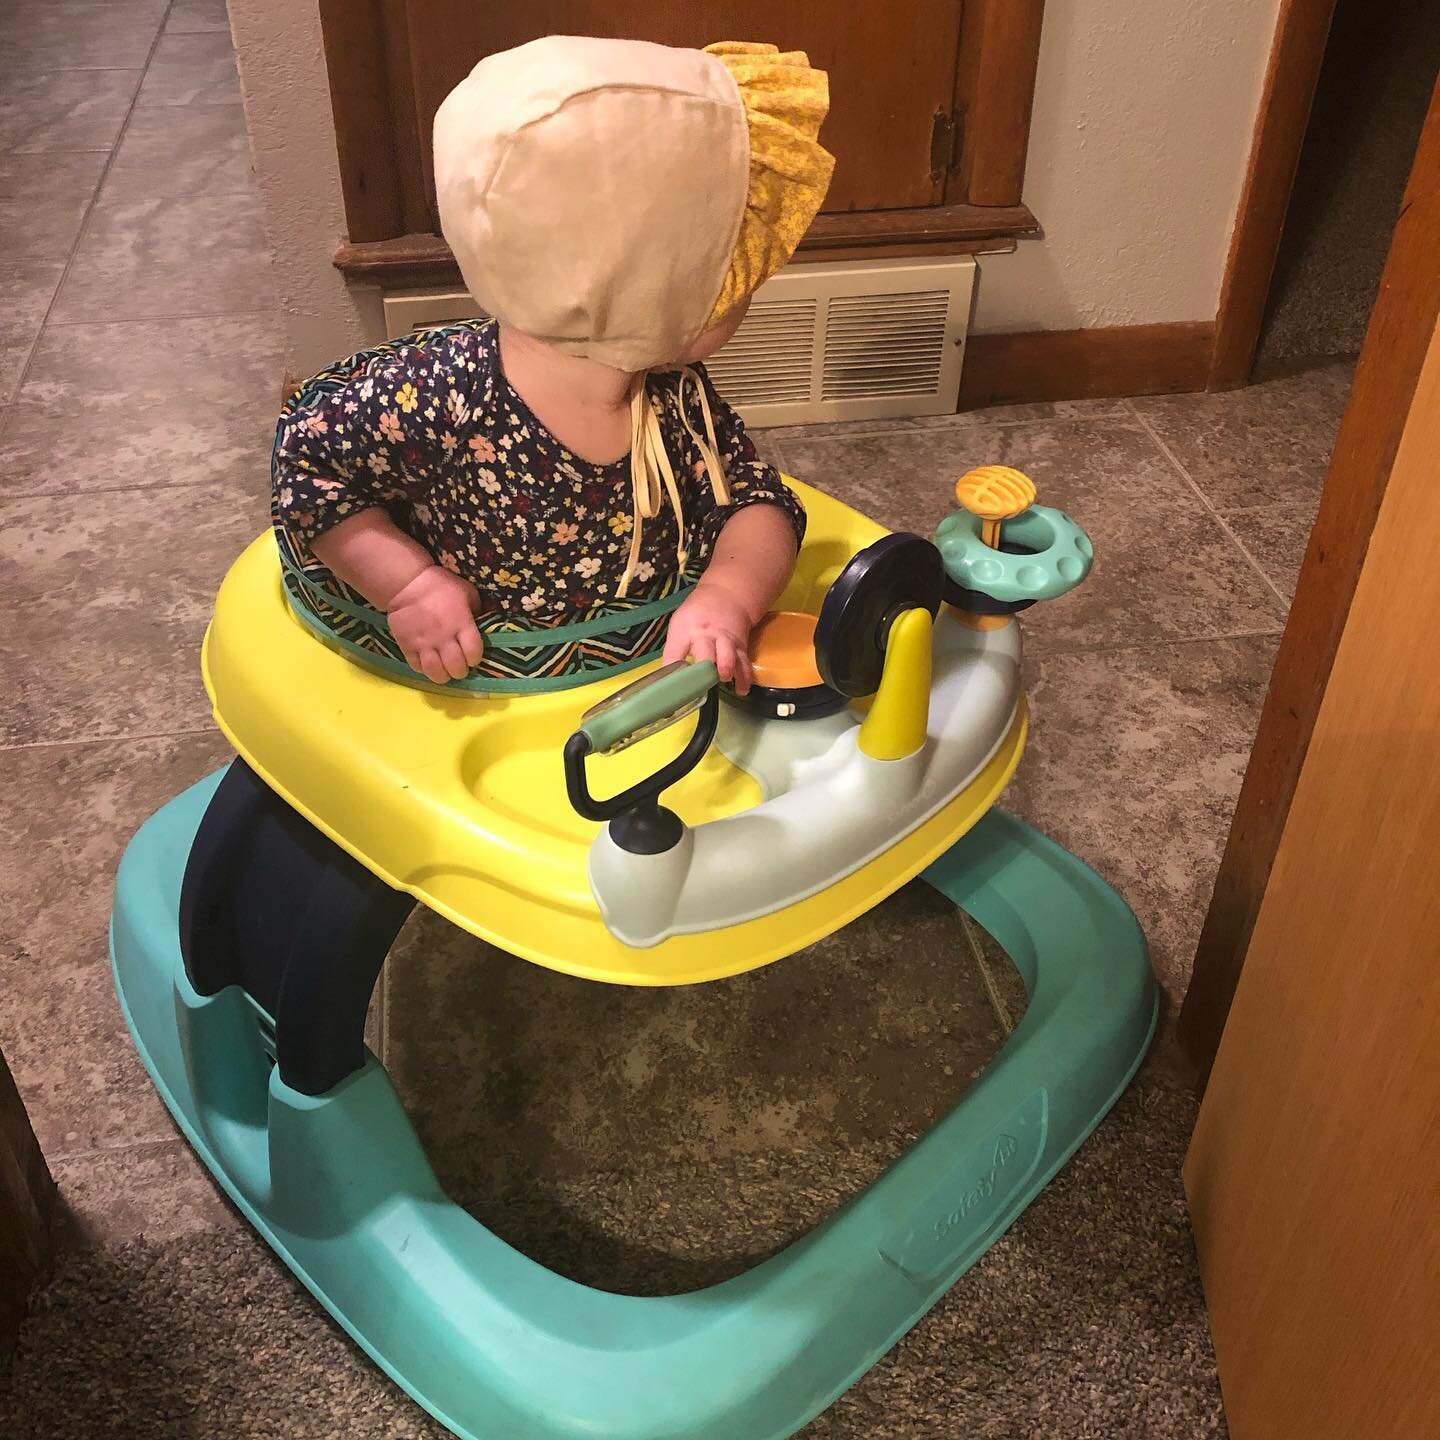 Somehow we have a 10 month old! She&rsquo;s real cute and almost always wearing a @sweet_as_april bonnet. We are borrowing this walker from a friend and it is a perfect late afternoon distraction. How are you holding up today, friends?